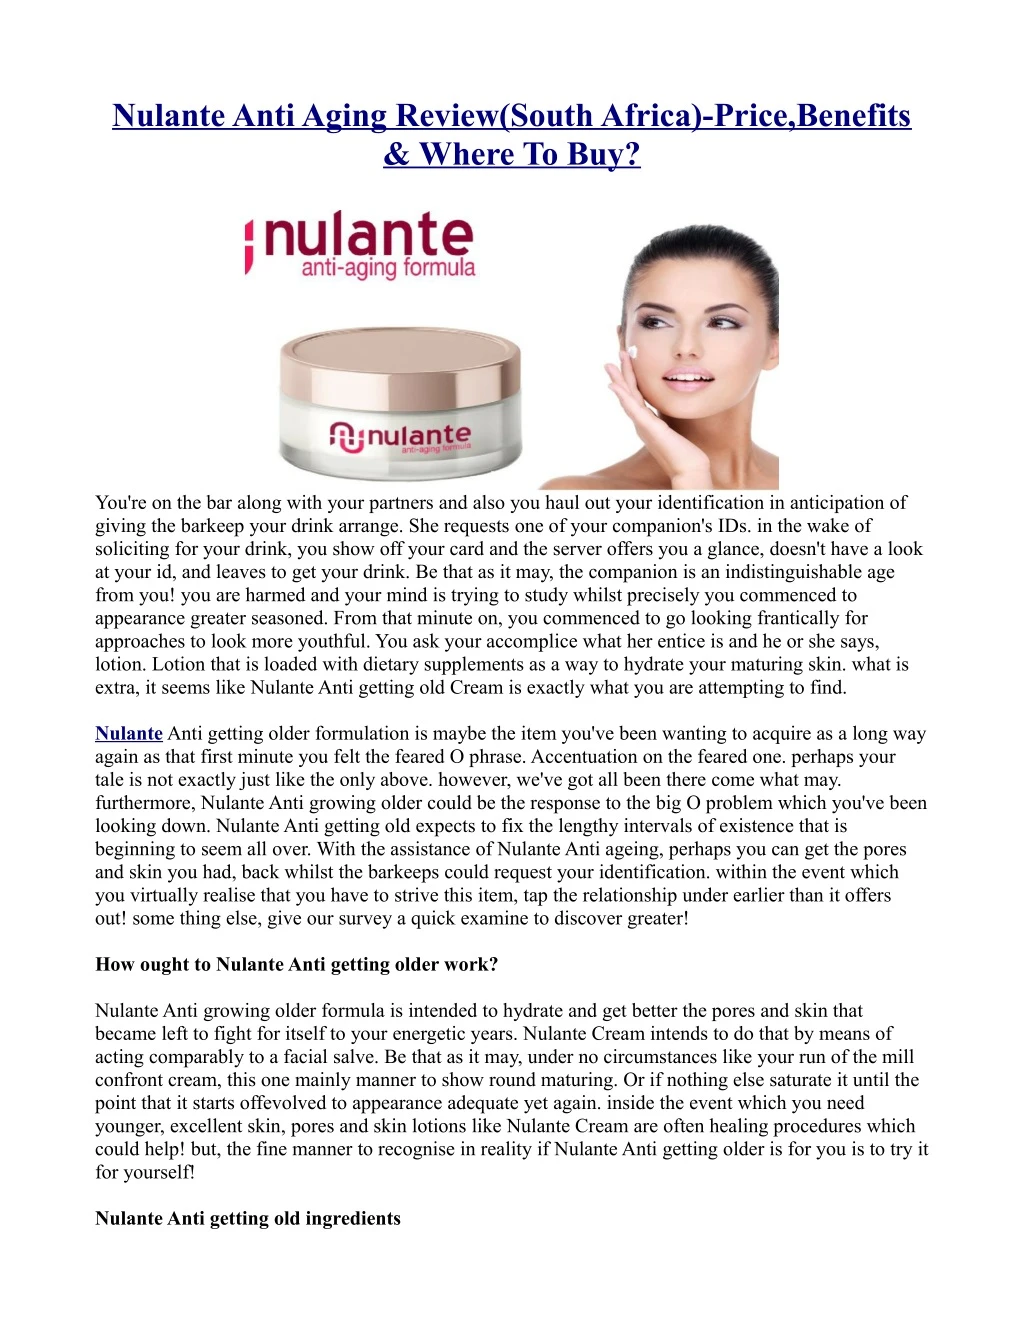 nulante anti aging review south africa price n.